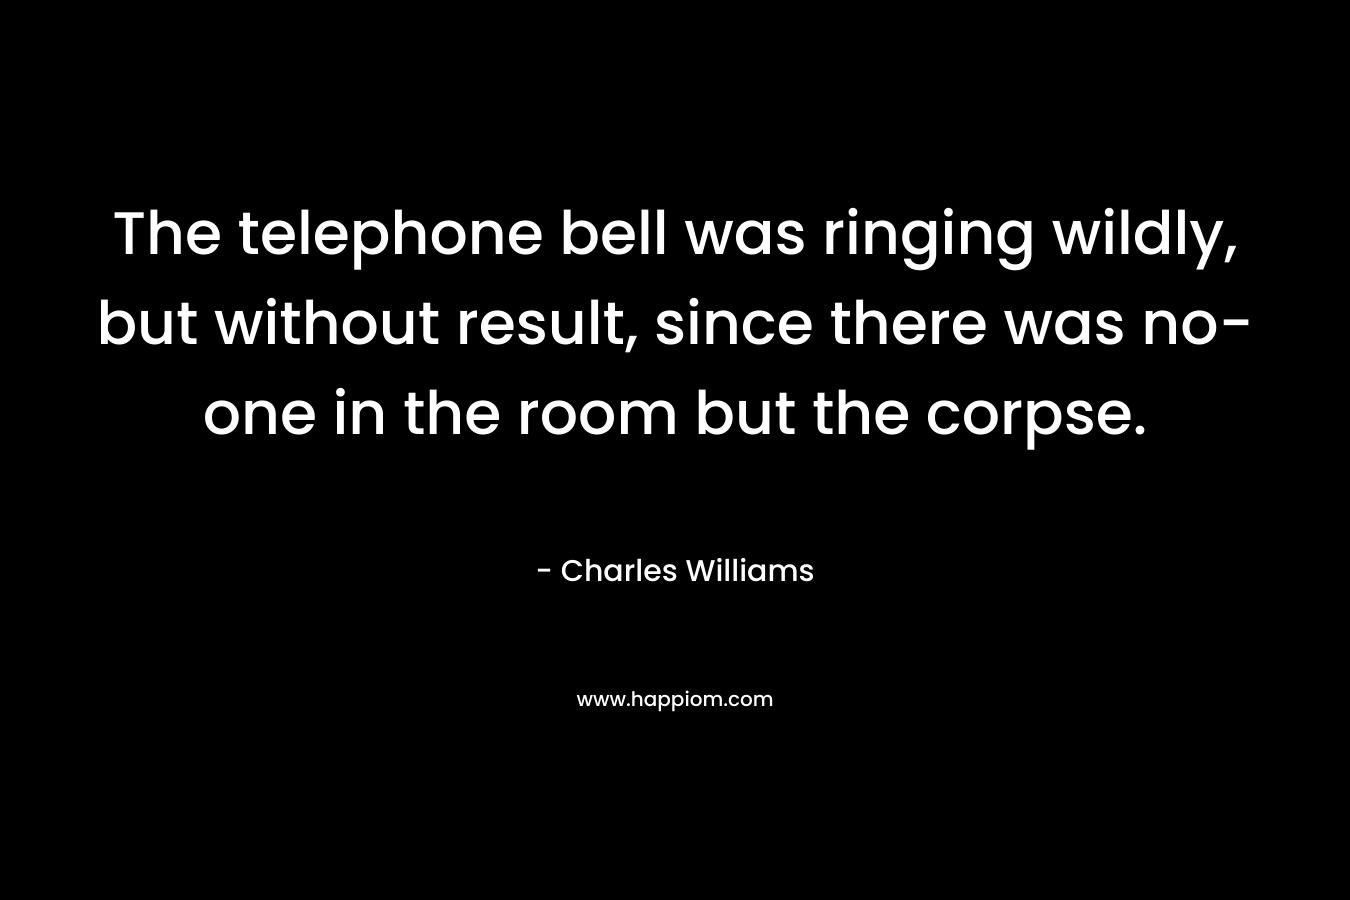 The telephone bell was ringing wildly, but without result, since there was no-one in the room but the corpse. – Charles Williams